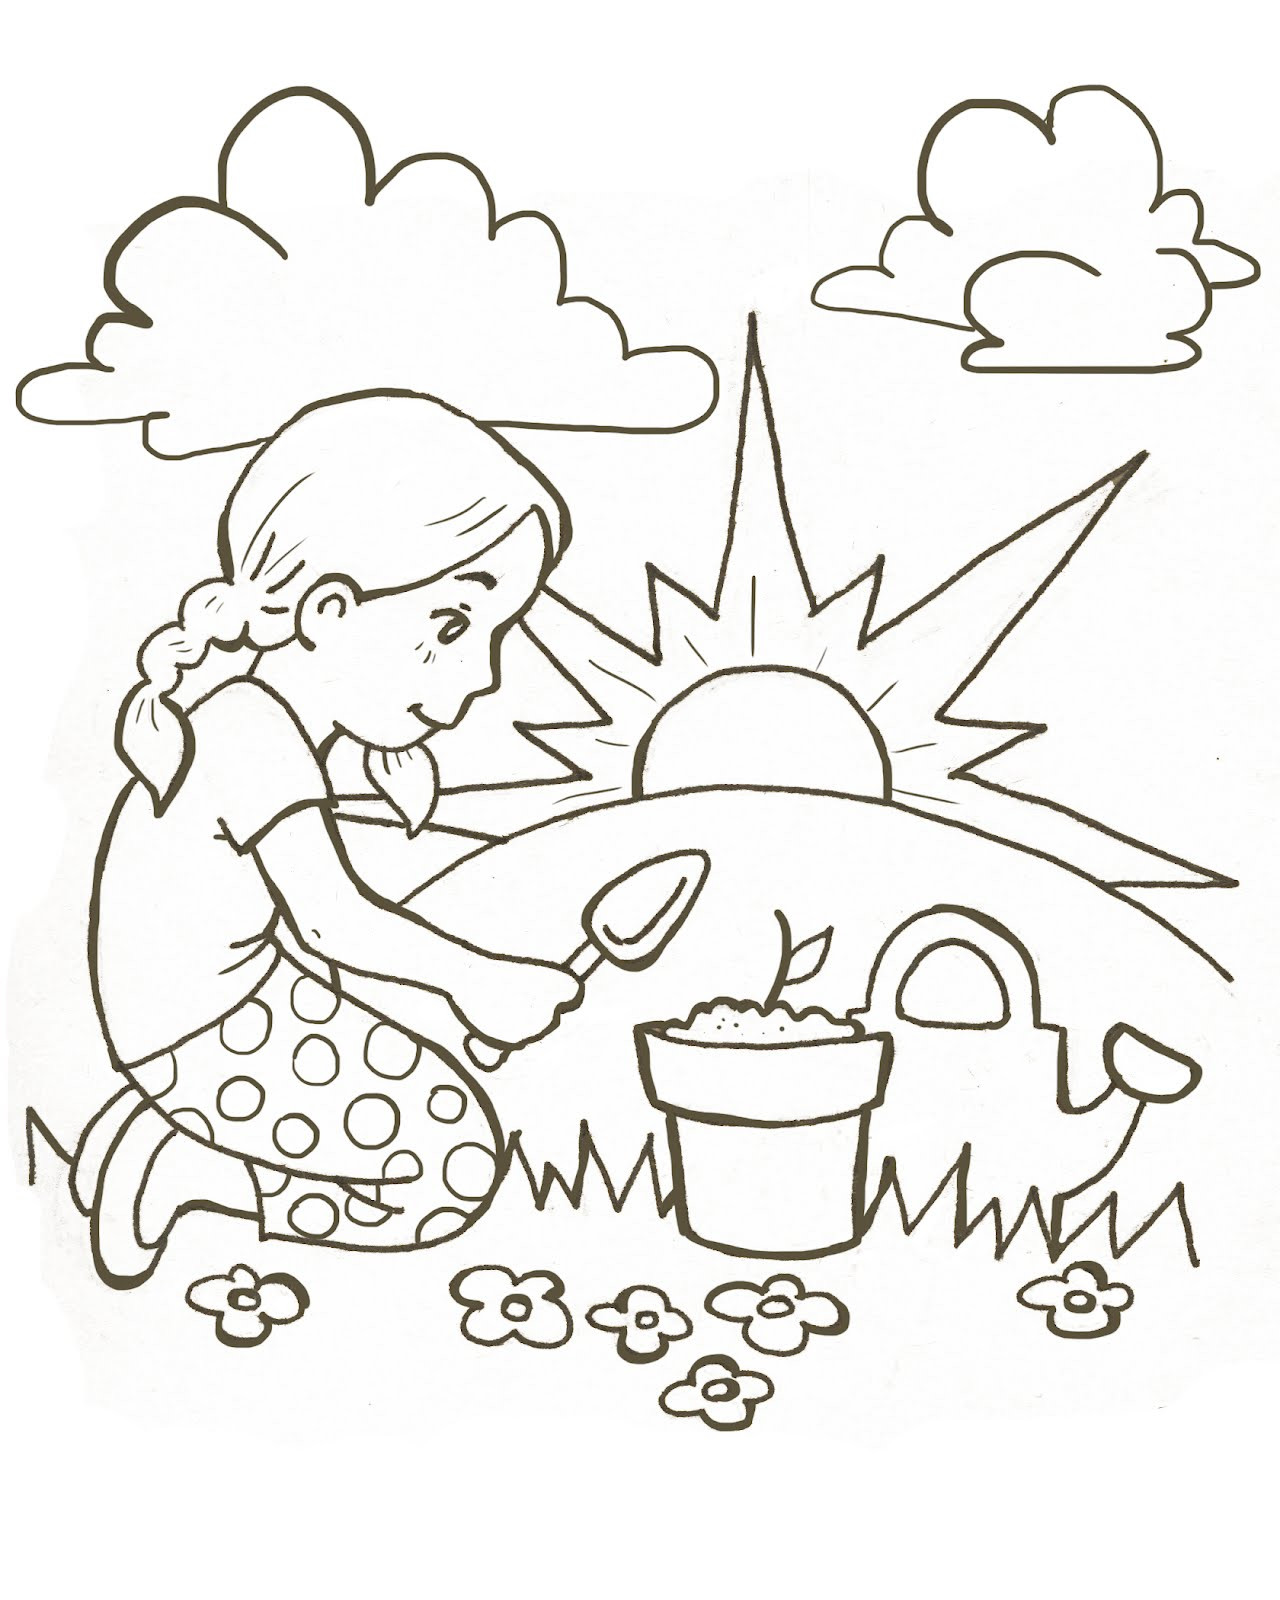 Lds Printable Coloring Pages
 ILLUSTRATION ALCHEMY LDS Mobile Apps Coloring Pages